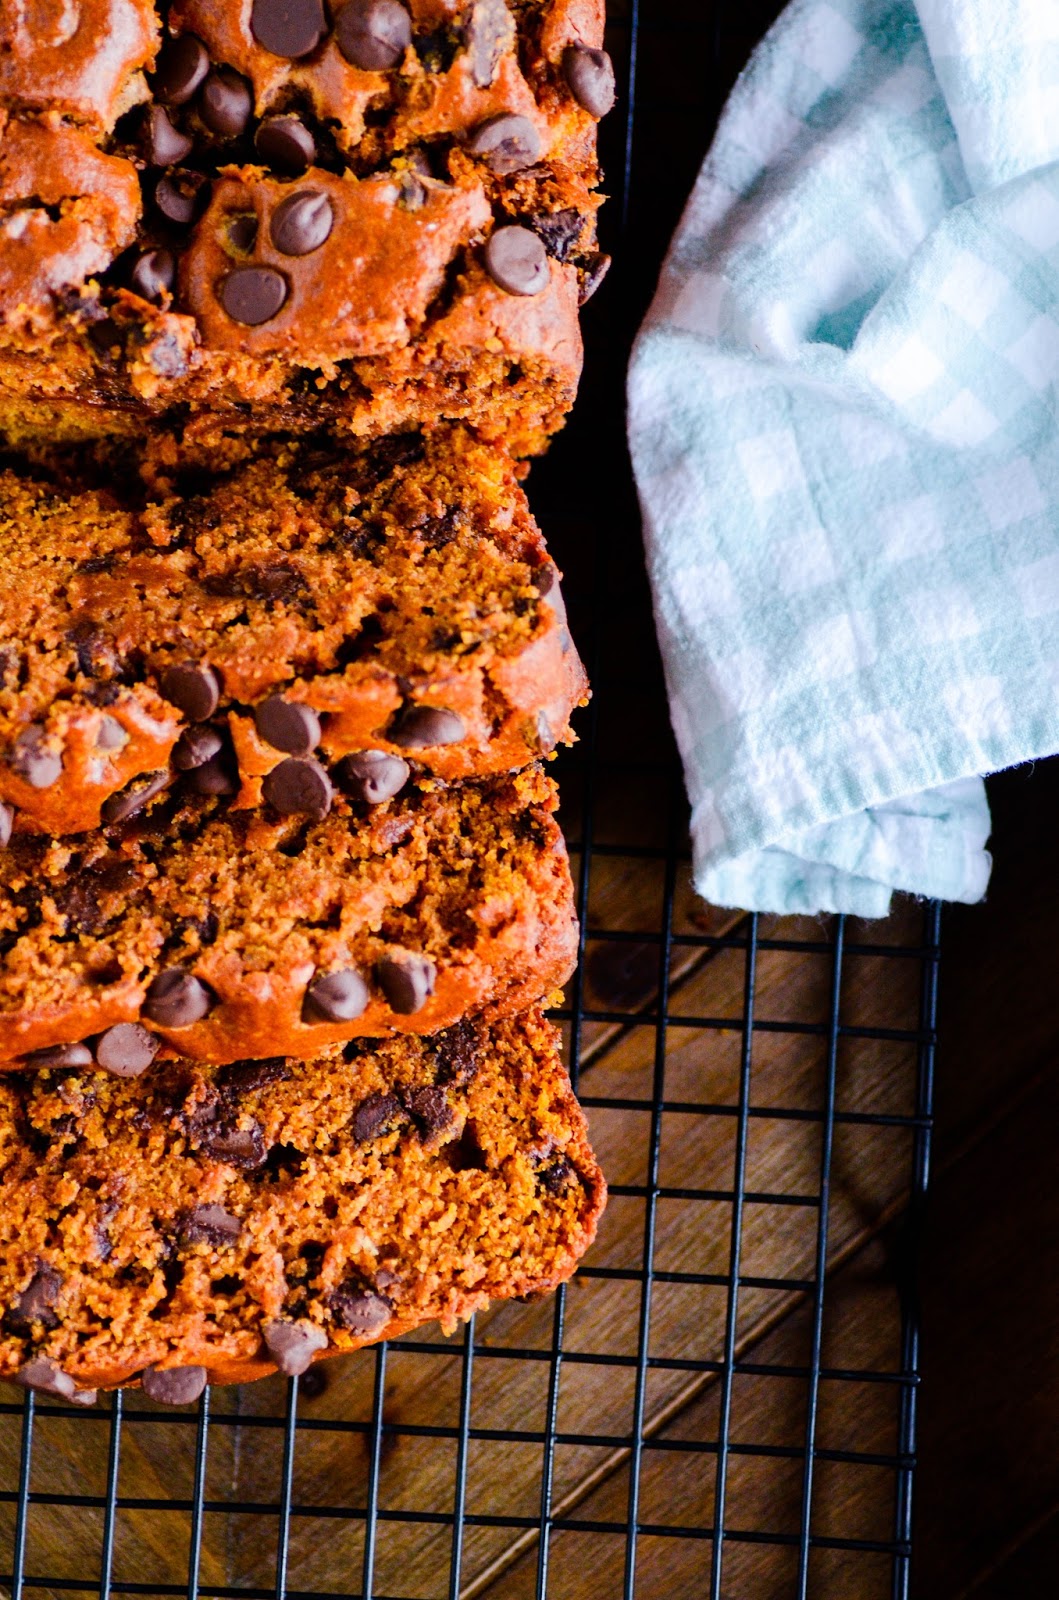 If you love pumpkin bread, this is the recipe you've been searching for. Moist, perfectly spiced, and just the right amount of chocolate chips!